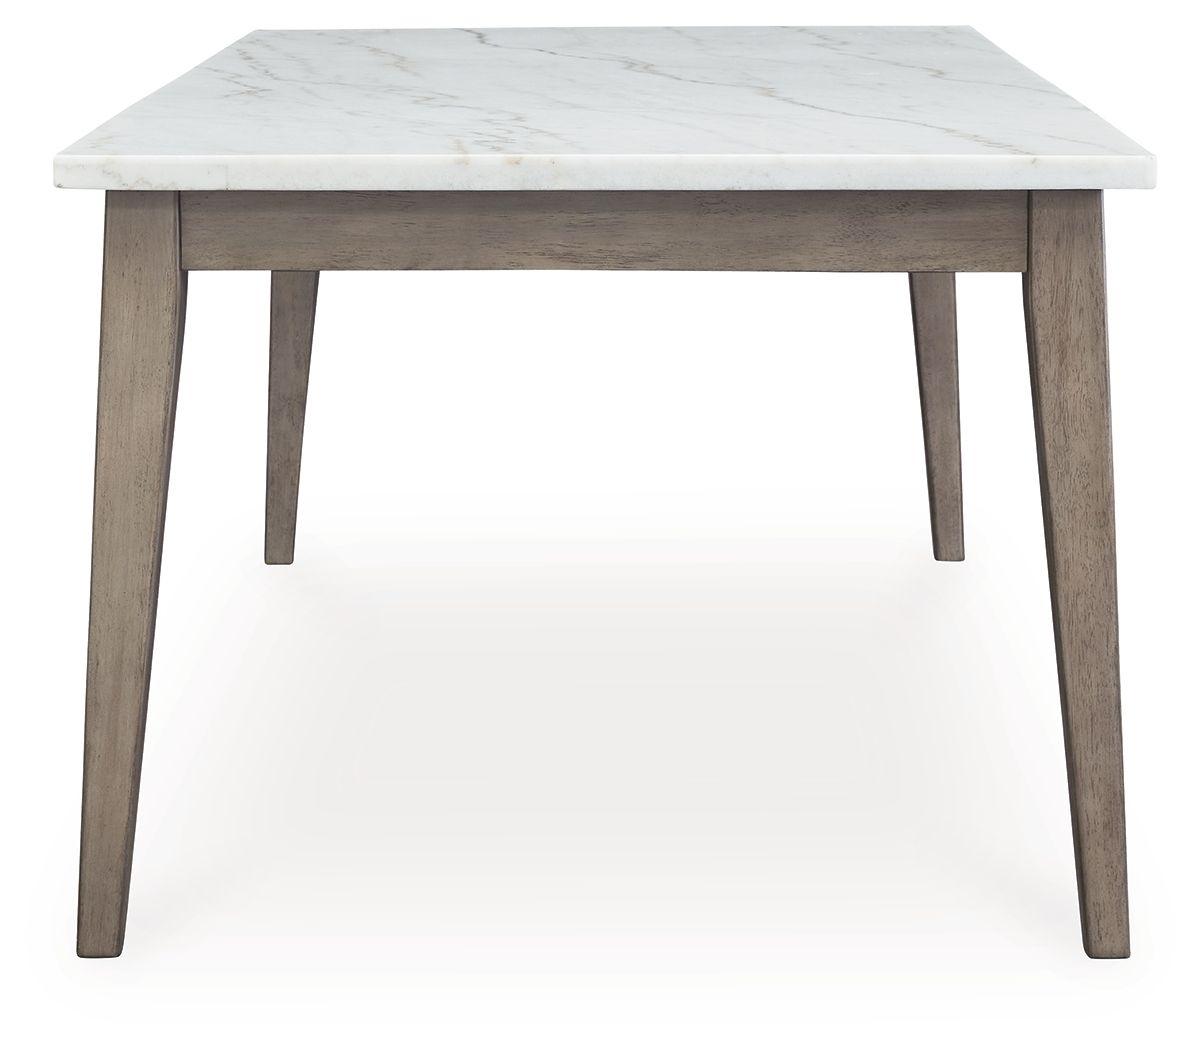 Signature Design by Ashley® - Loyaska - White / Brown - Rectangular Dining Room Table - 5th Avenue Furniture